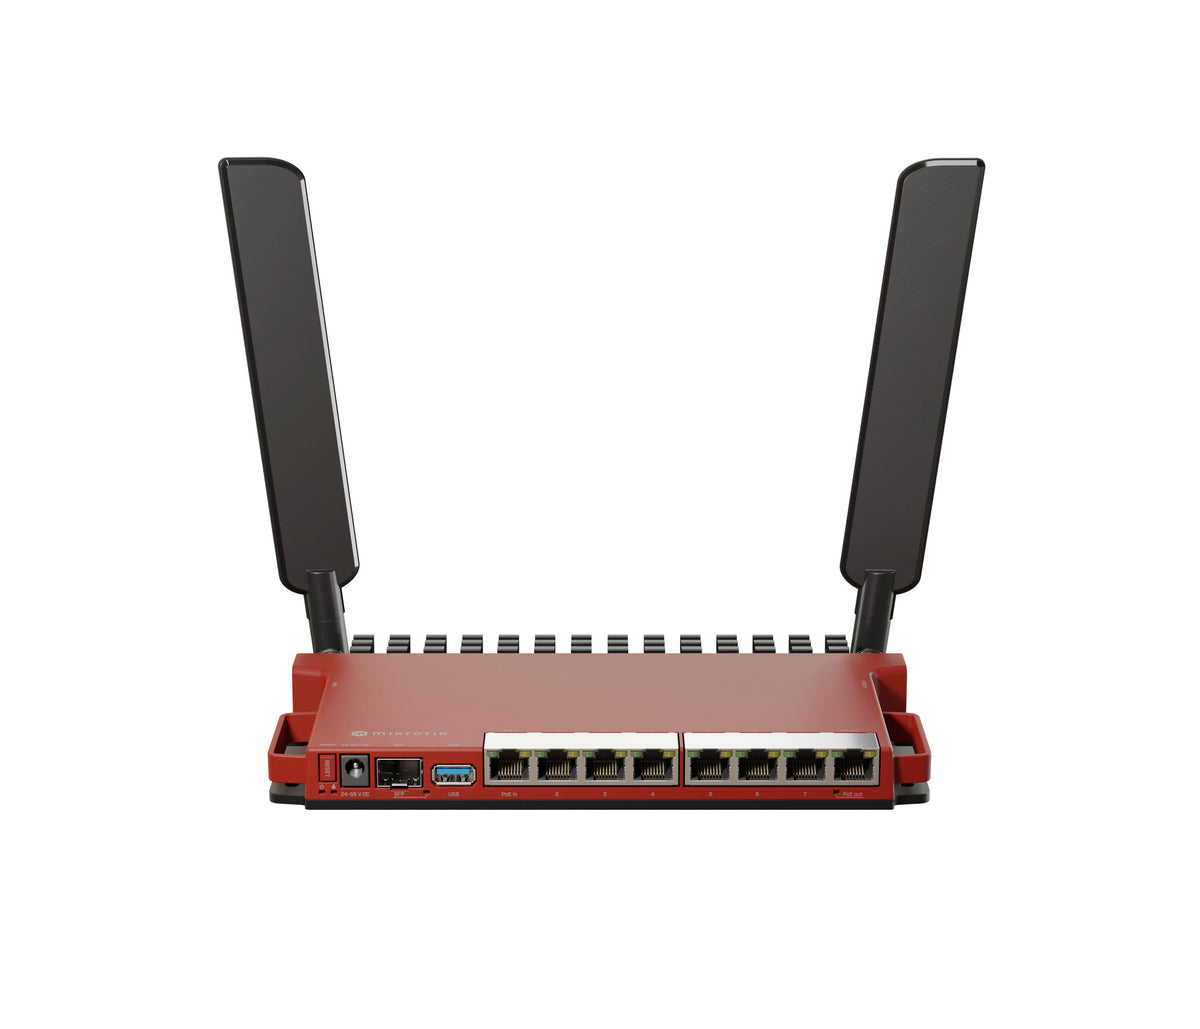 Mikrotik L009UiGS-2HaxD-IN - Gigabit Ethernet Single-band (2.4 GHz) wireless router in Red